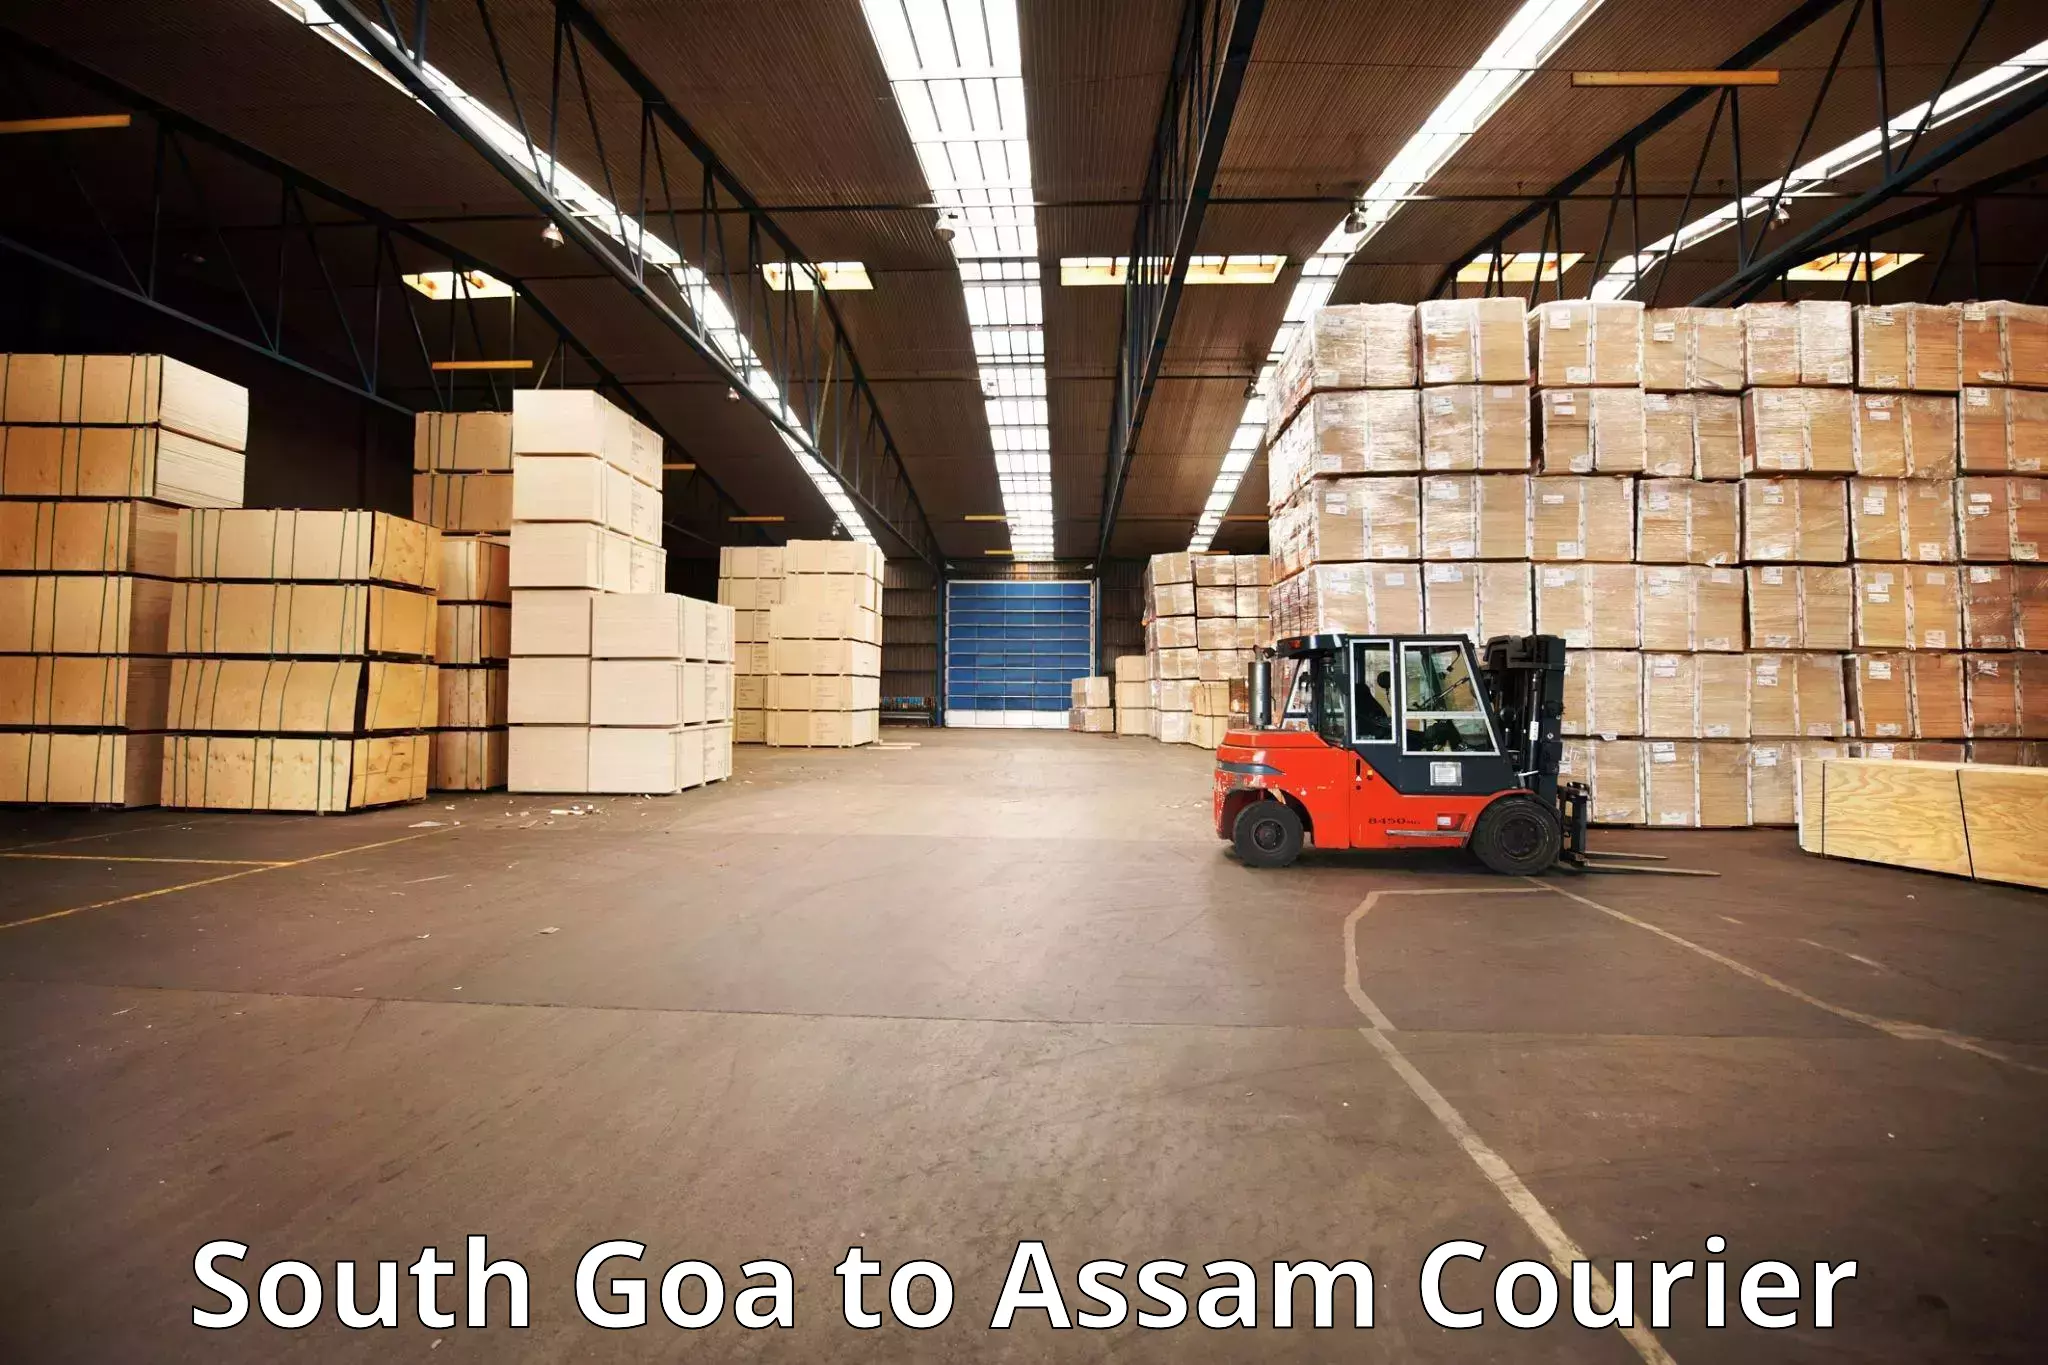 Hassle-free luggage shipping in South Goa to Barpeta